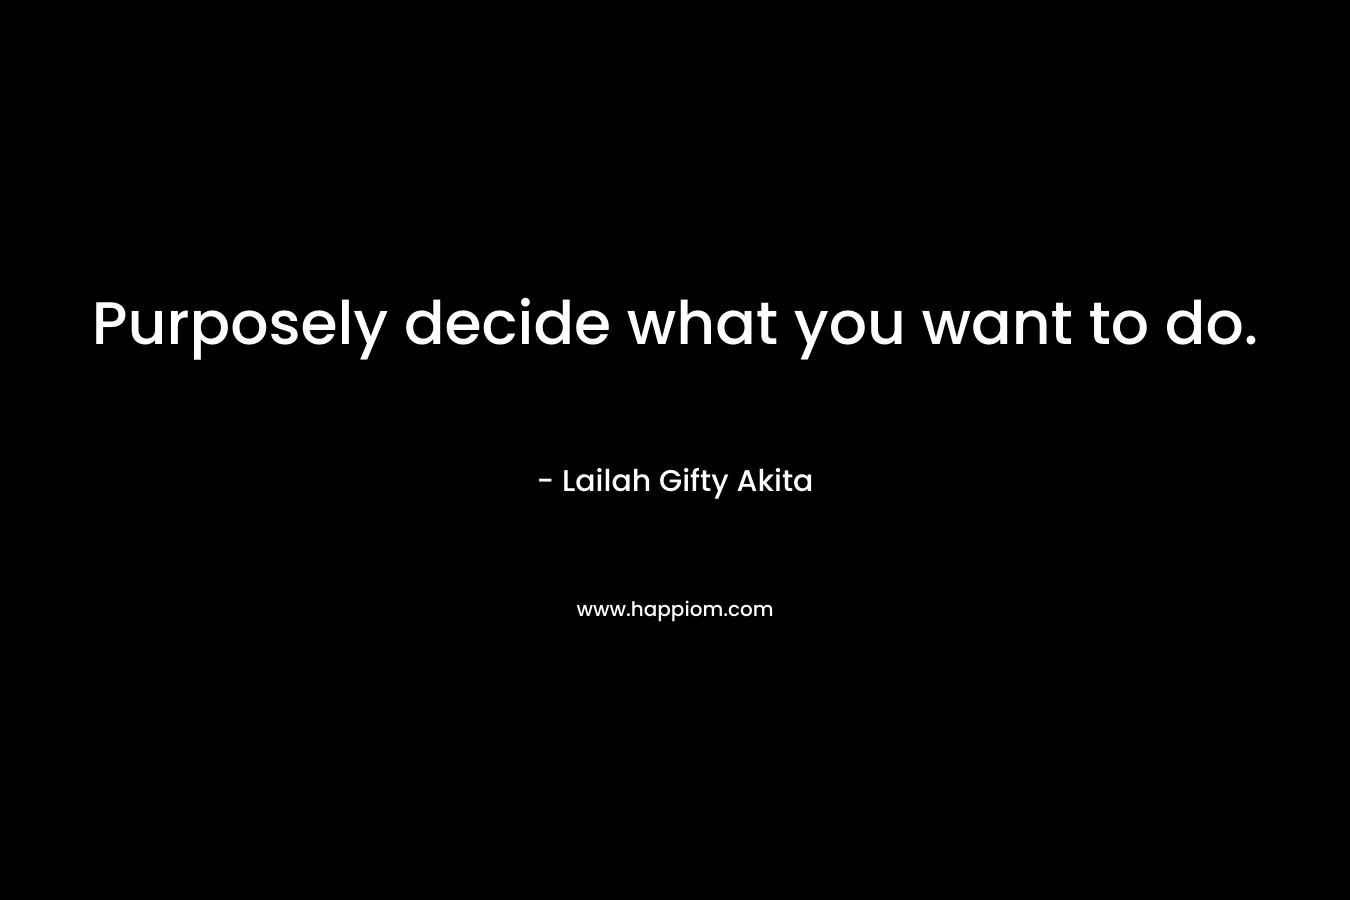 Purposely decide what you want to do.